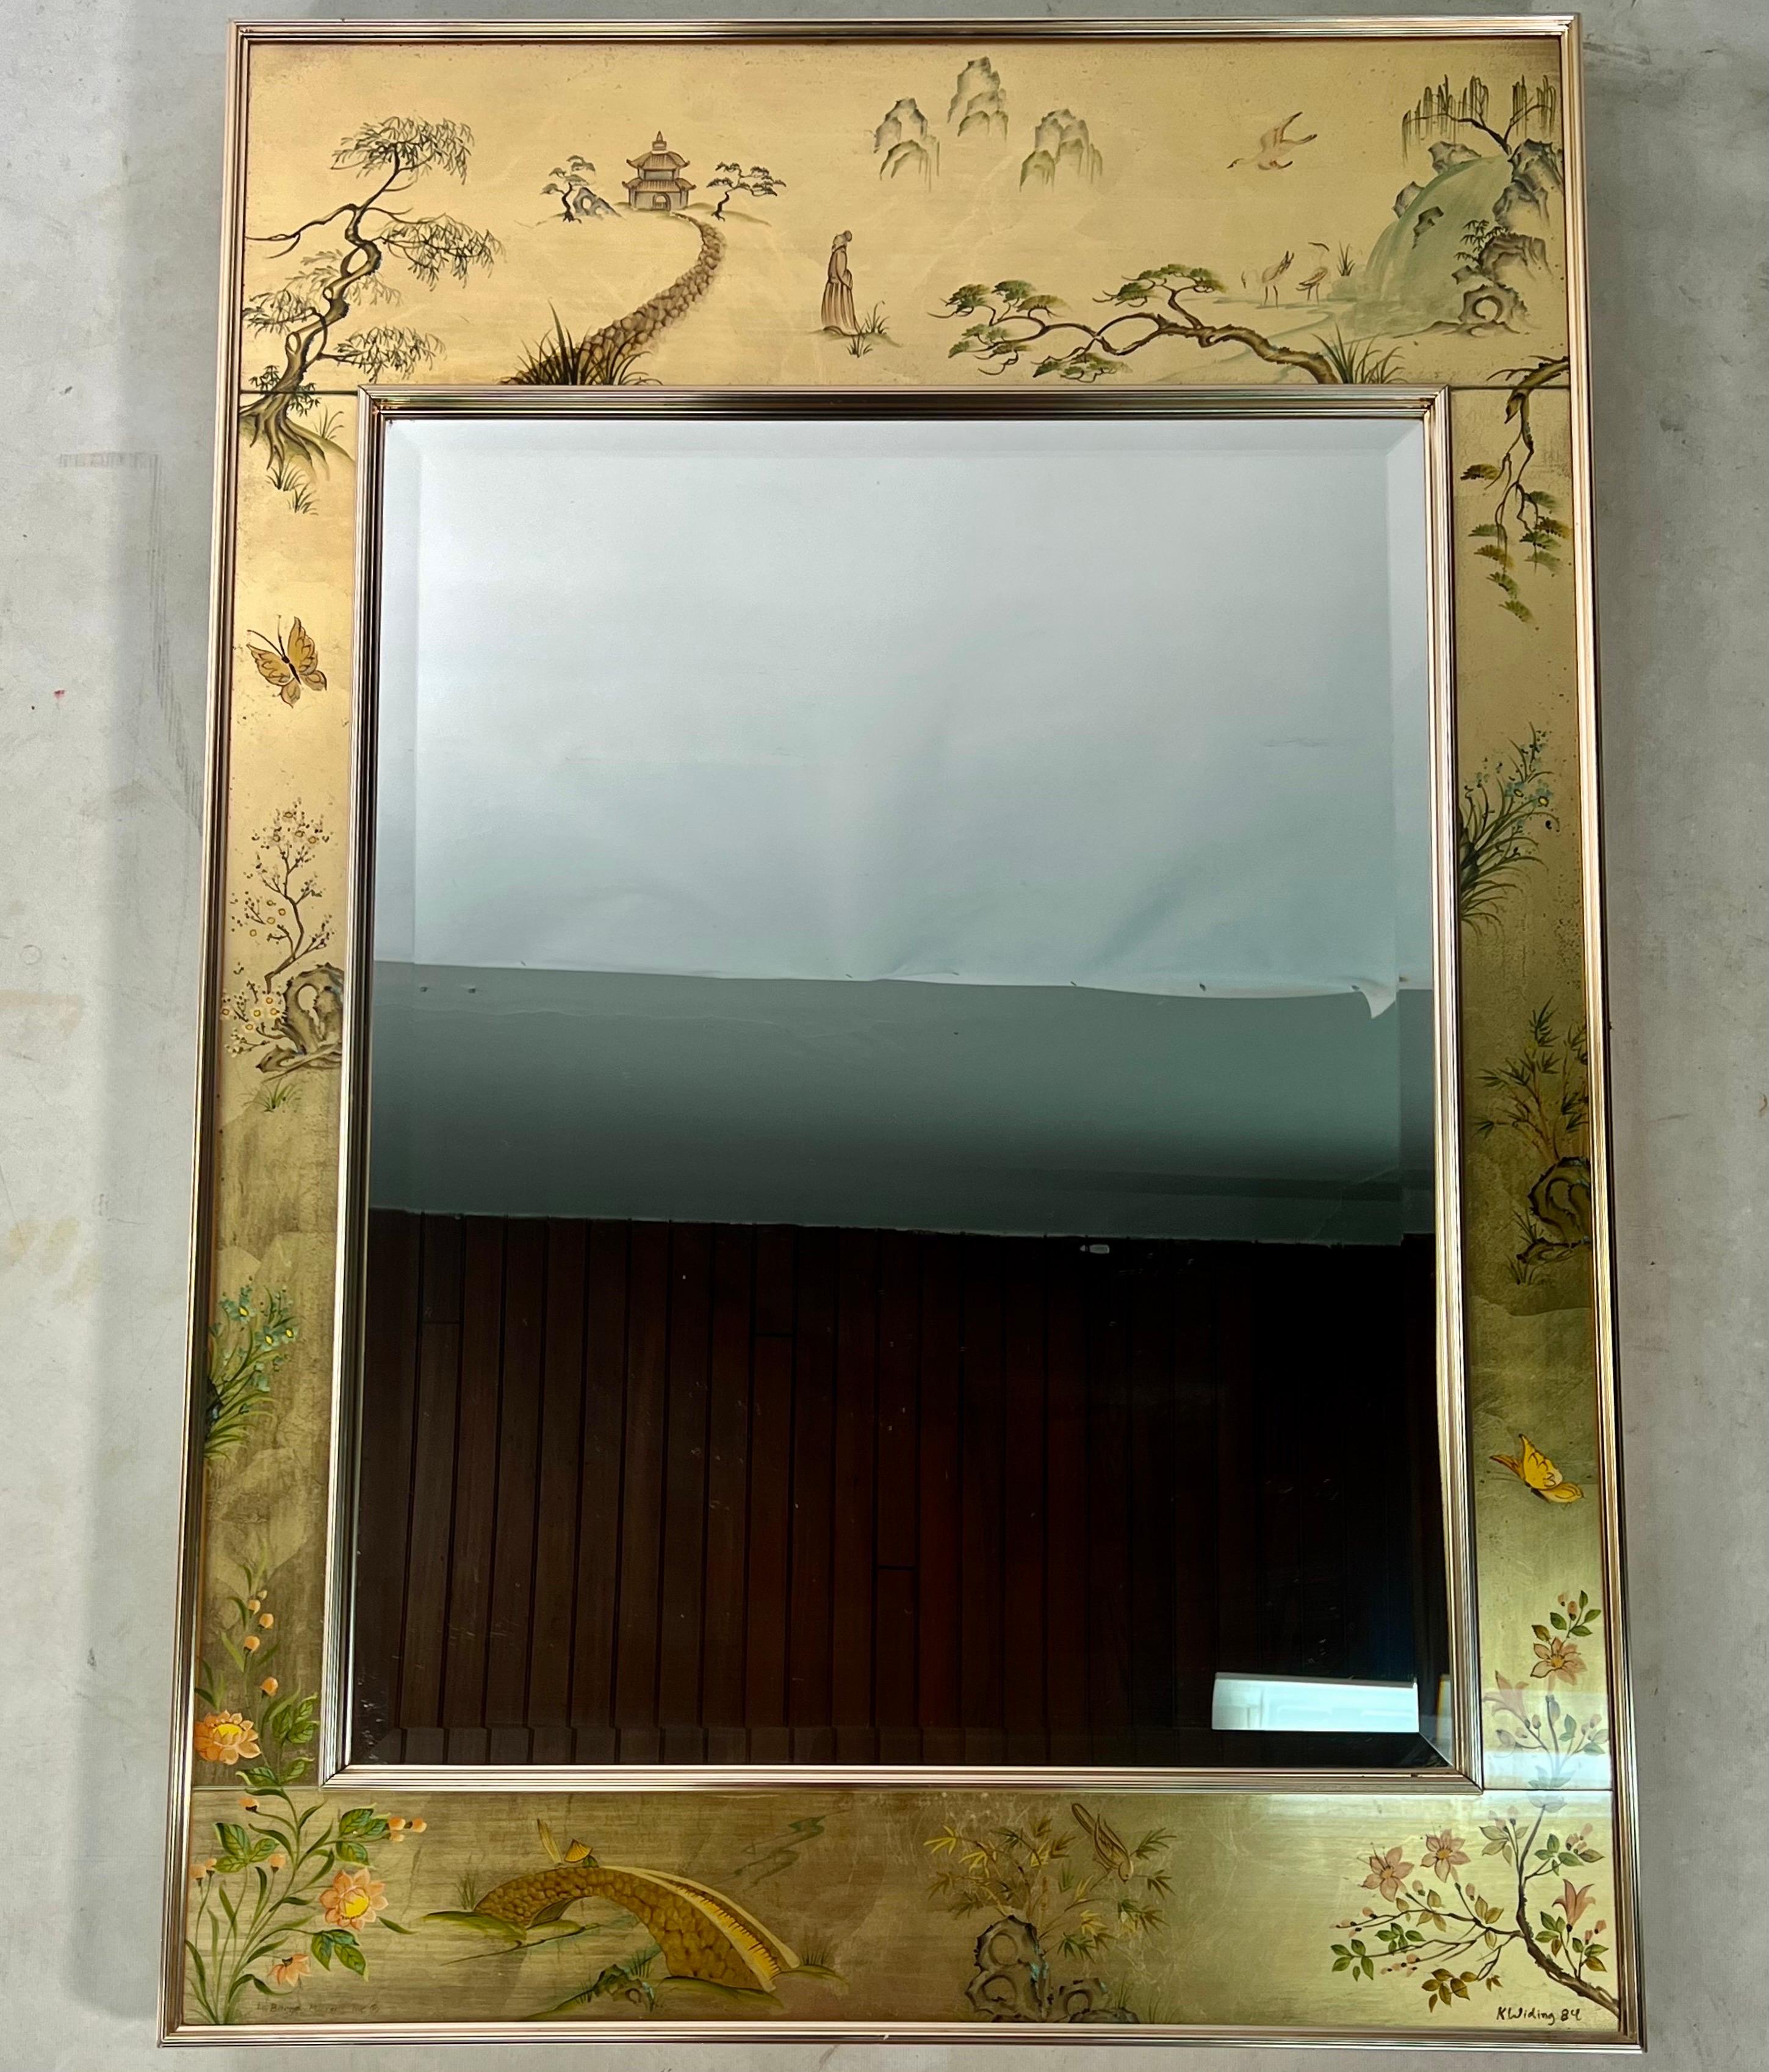 LaBarge signed gold reverse painted chinoiserie wall mirror. This is a absolutely gorgeous wall mirror. The mirror is signed and was made in 1984.